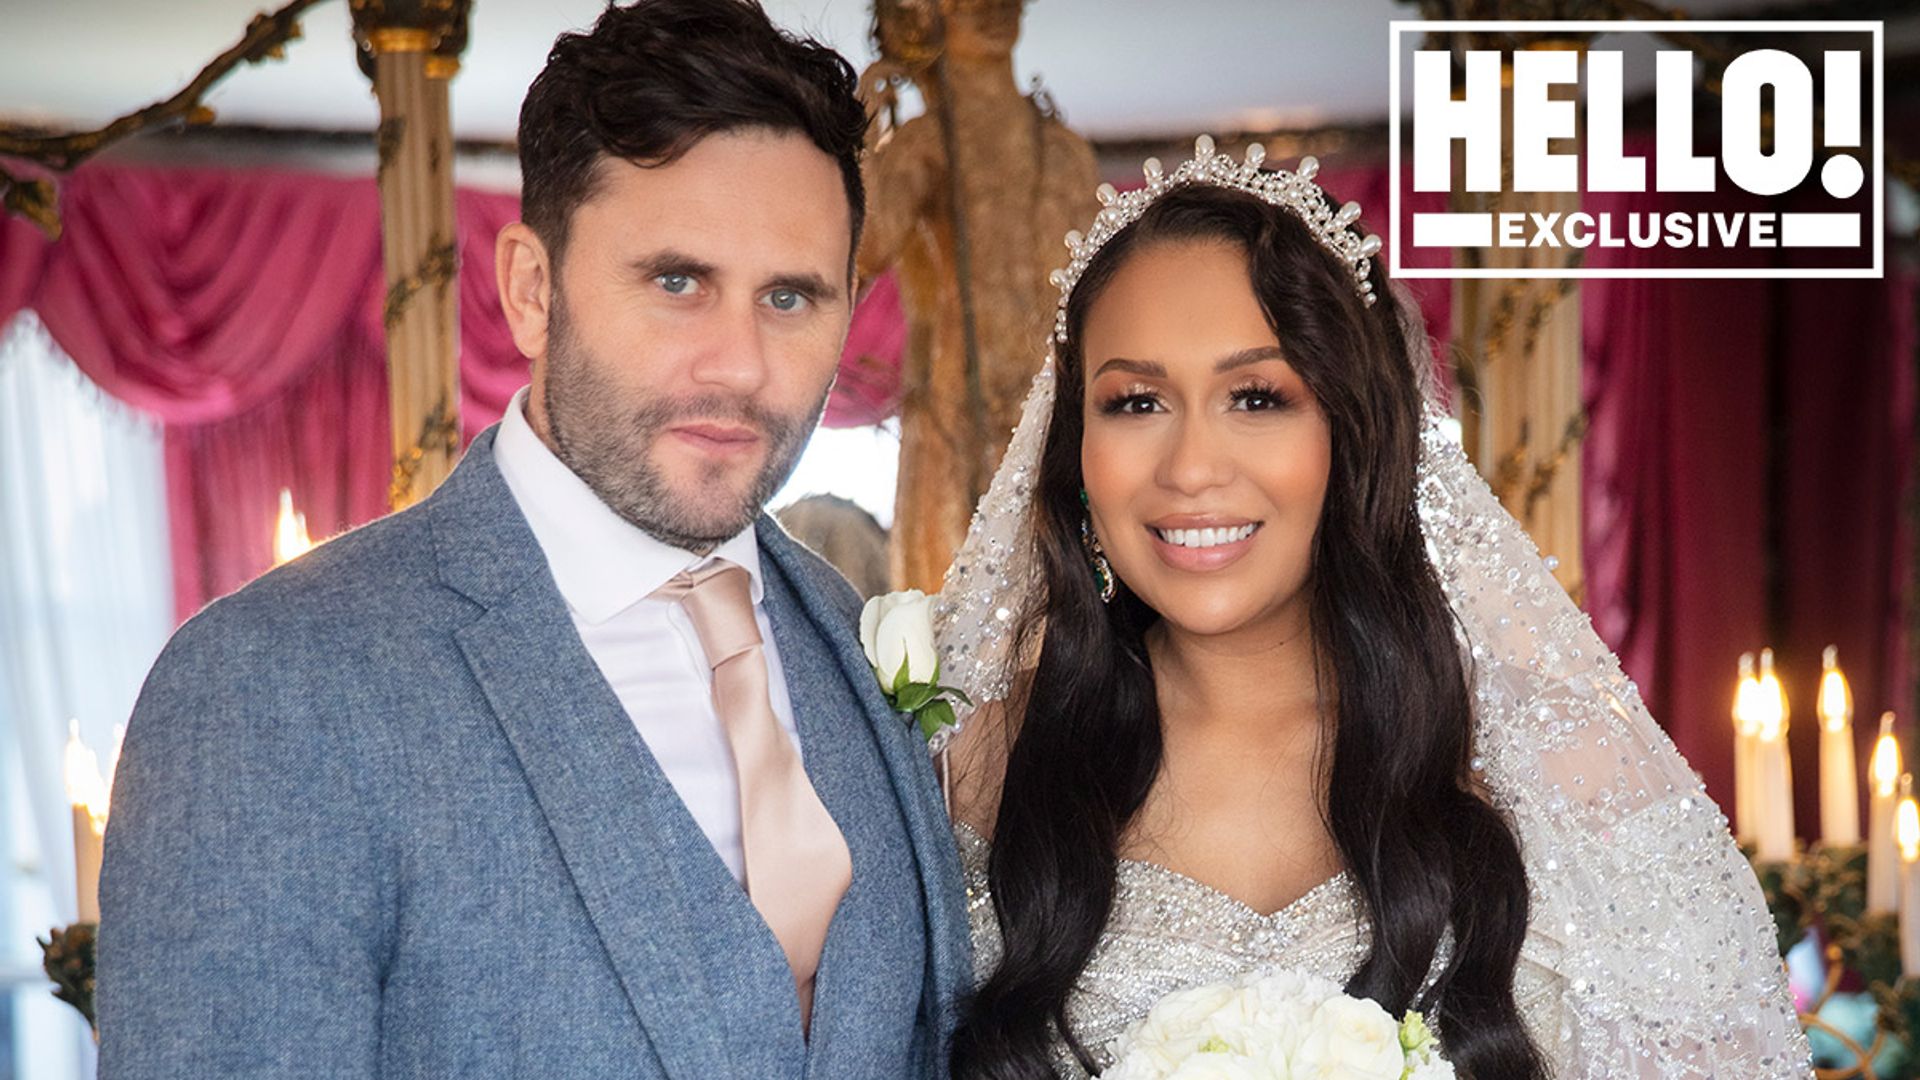 Tying The Knot In A Secret Winter Ceremony, Singer-songwriter Rebecca  Ferguson And Husband Jonny Hughes Tell Of Their 'Fairytale' Big Day — And  How It Was Inspired By A Royal Wedding 